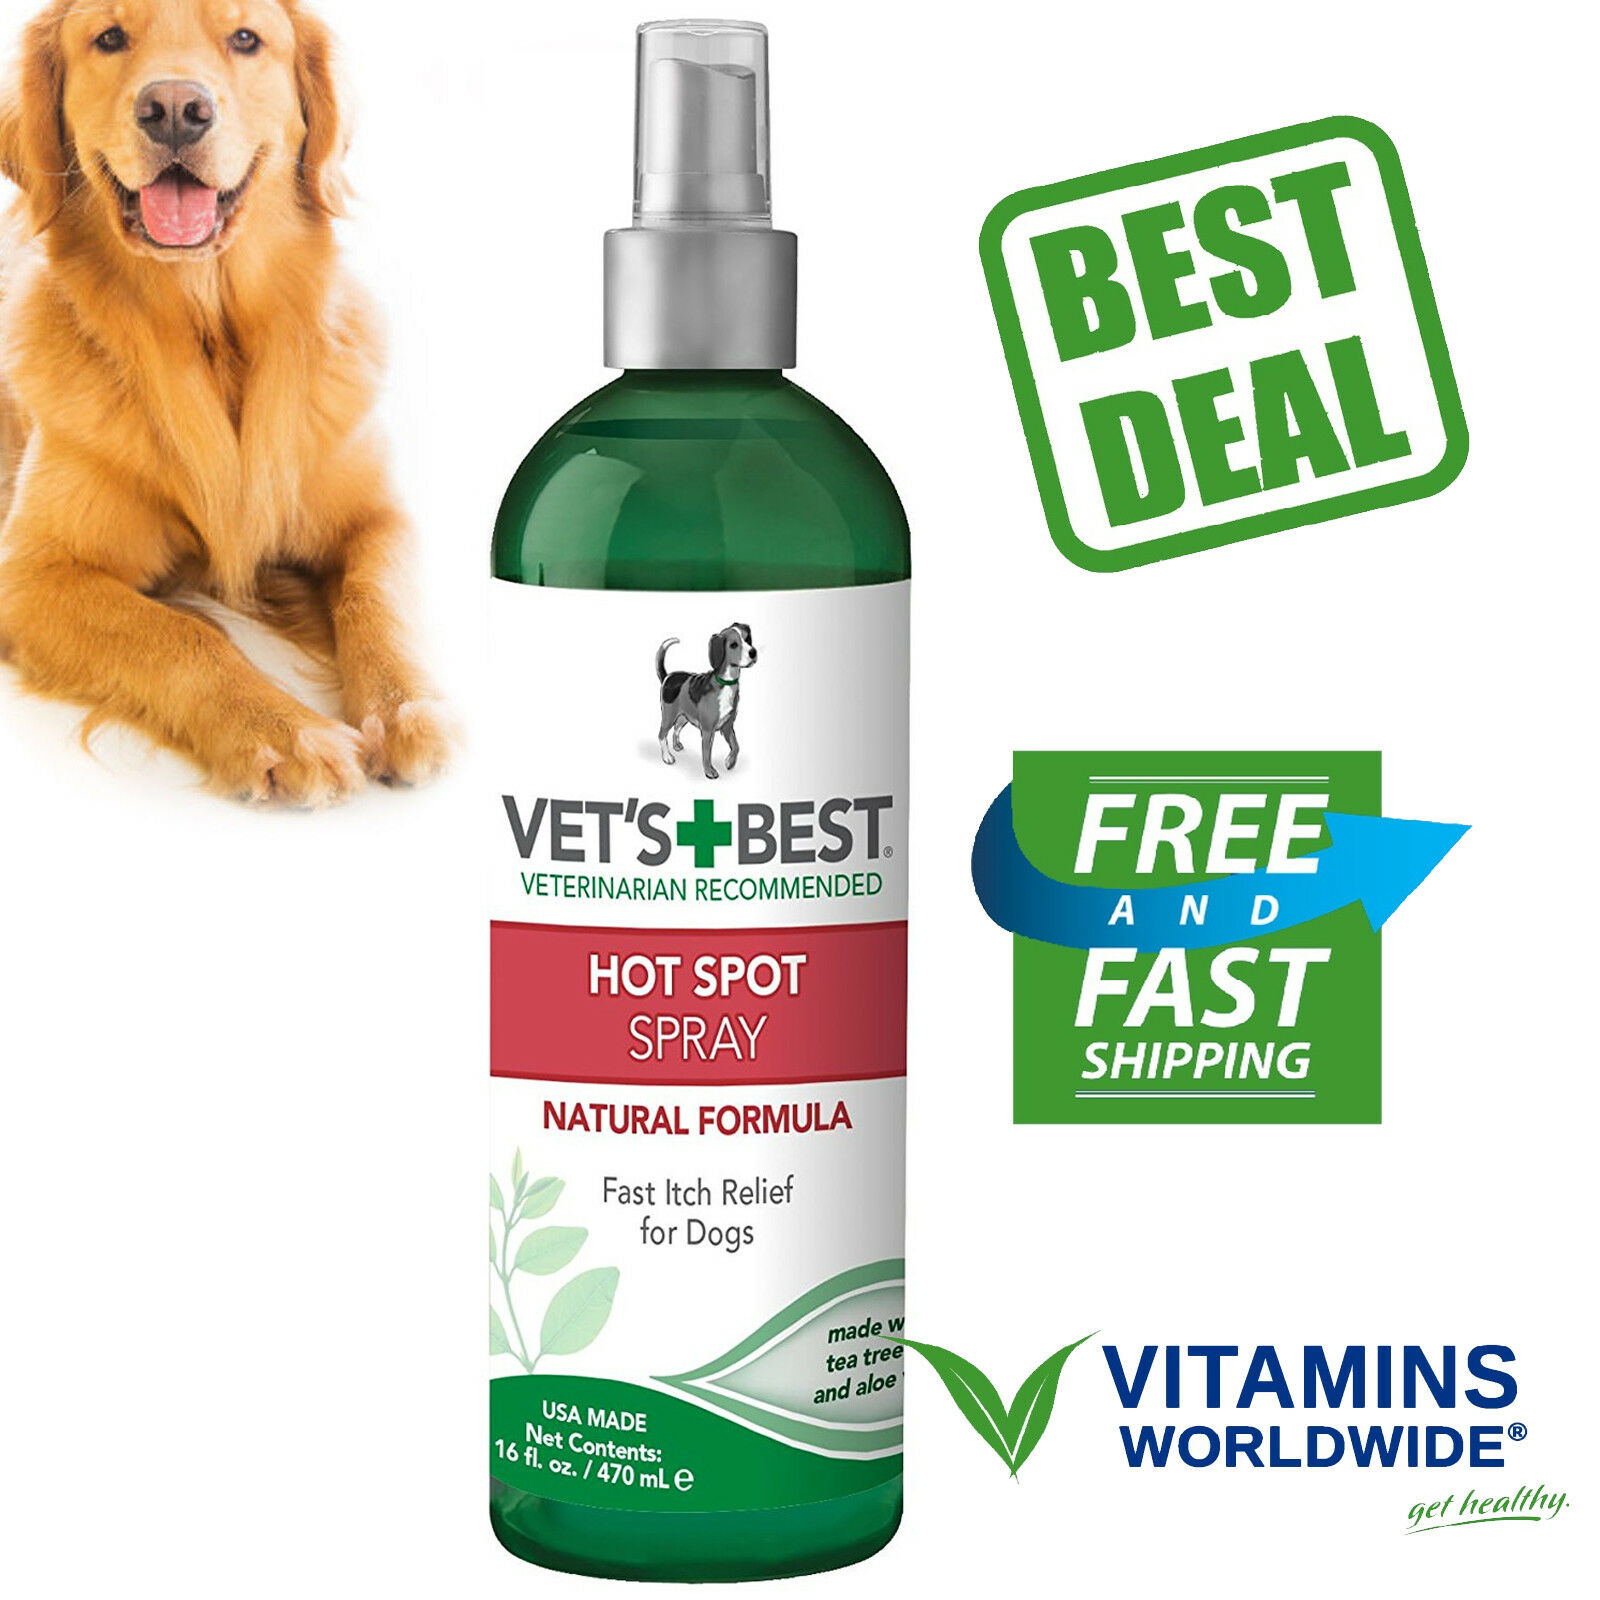 VET'S BEST HOT SPOT Itch Relief Spray for Dogs Natural